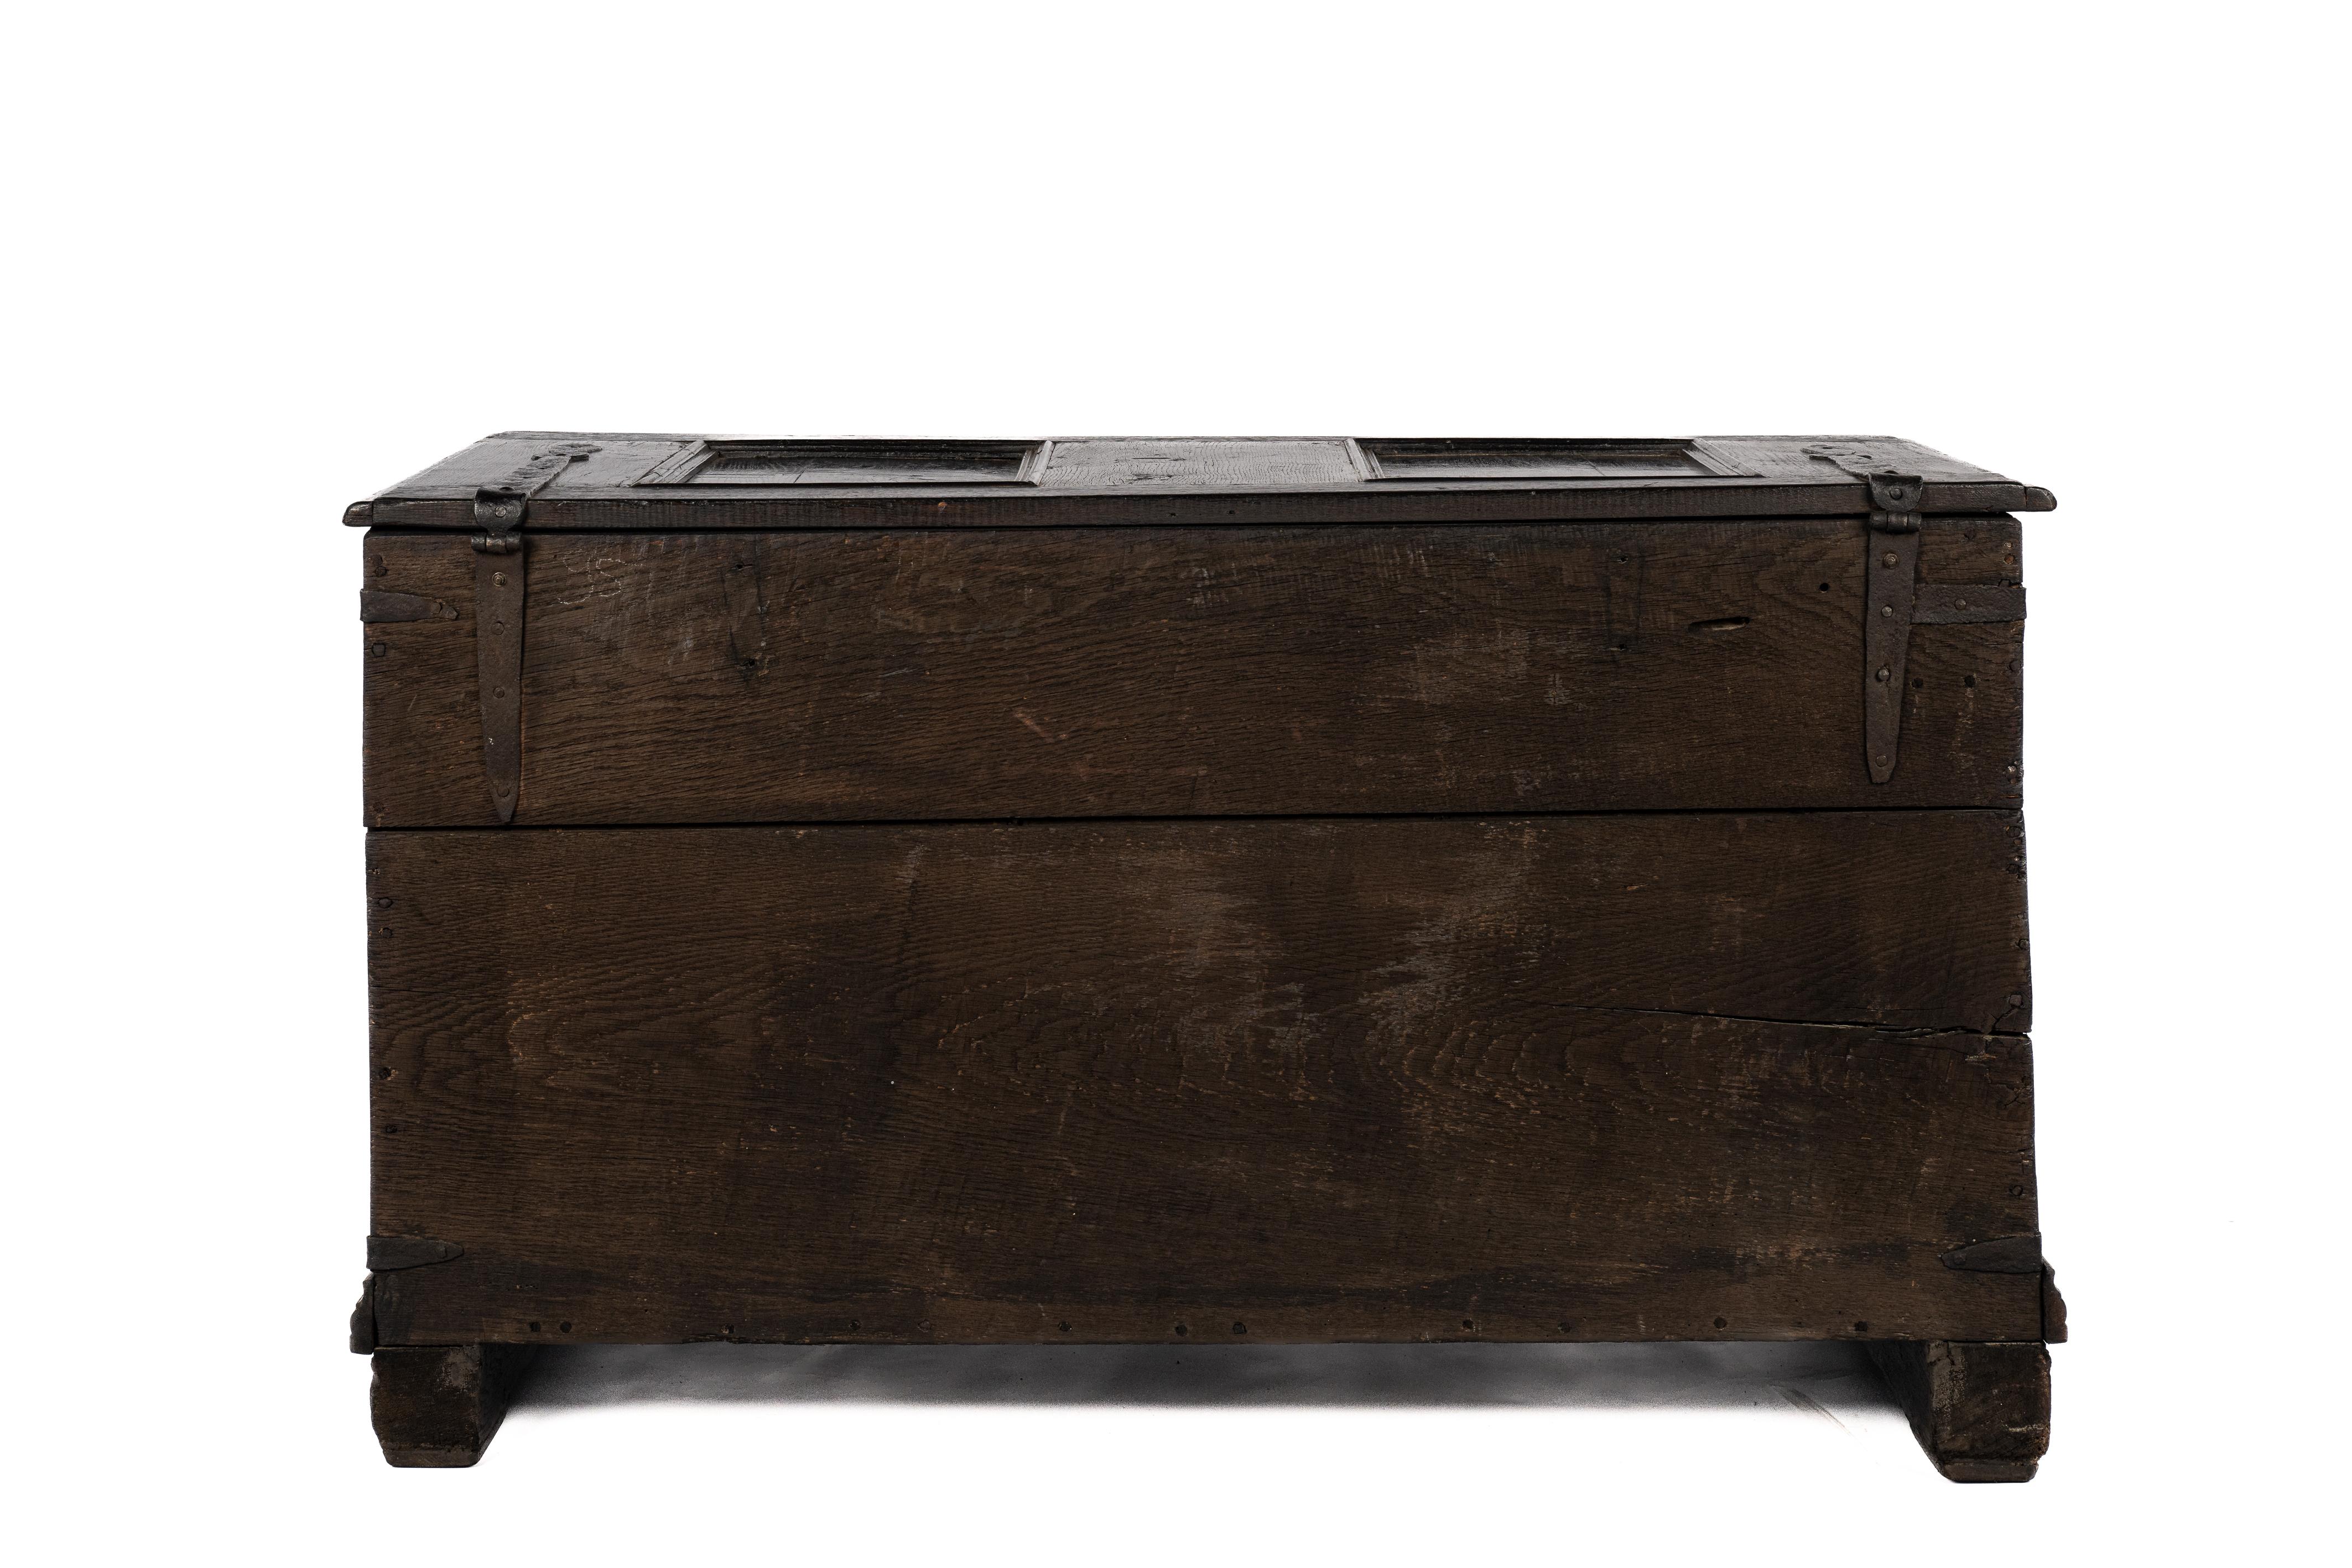 Forged  Antique late 18th century German Solid black Oak panelled trunk or coffer For Sale